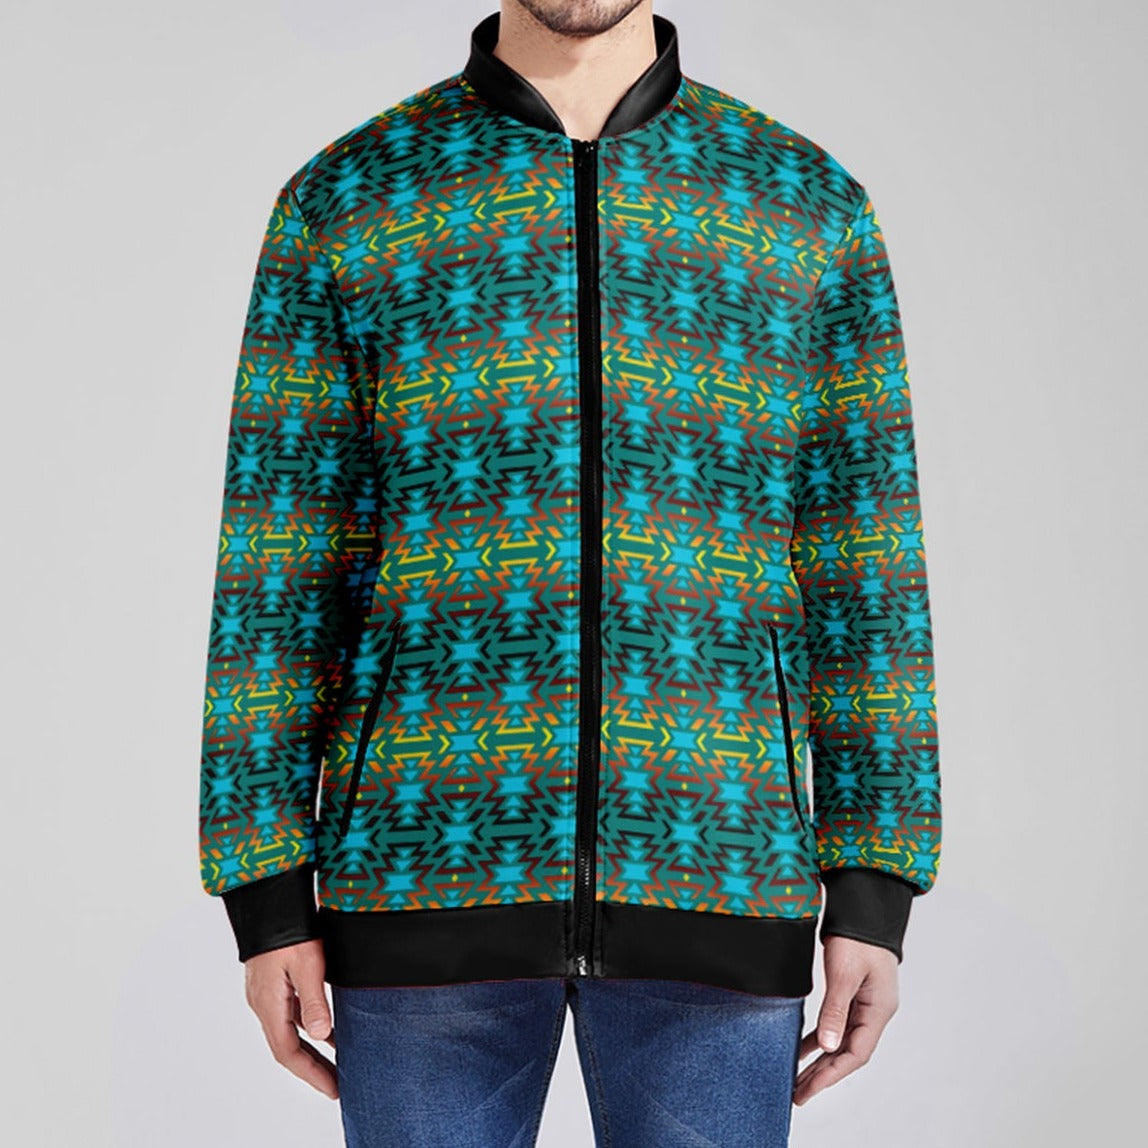 Fire Colors and Turquoise Teal Youth Zippered Collared Lightweight Jacket